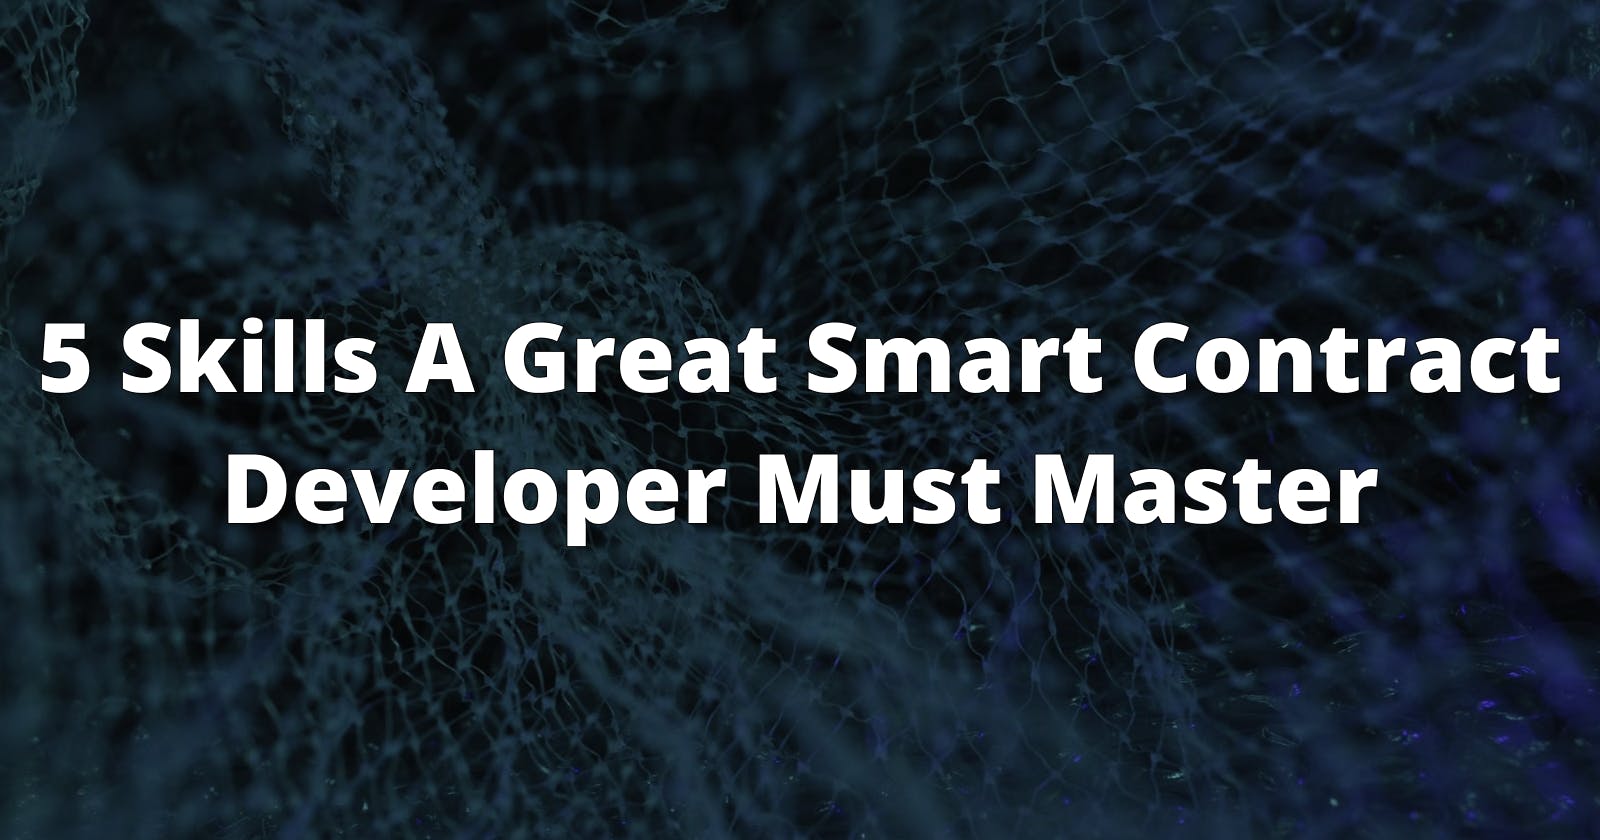 5 Skills A Great Smart Contract Developer Must Master